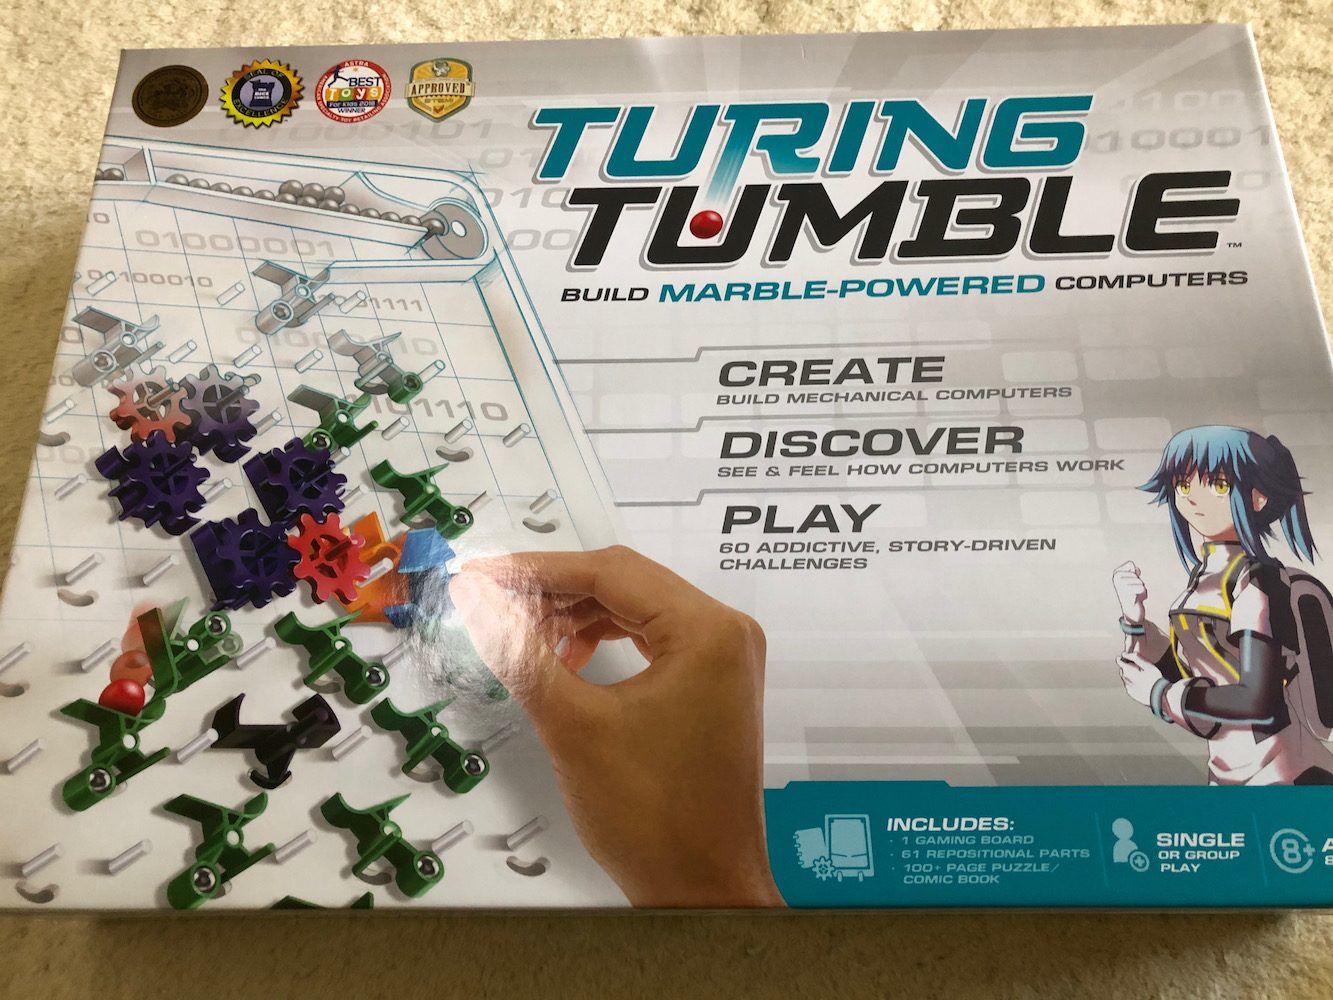 Turing Tumble is Turing-Complete - ScienceDirect